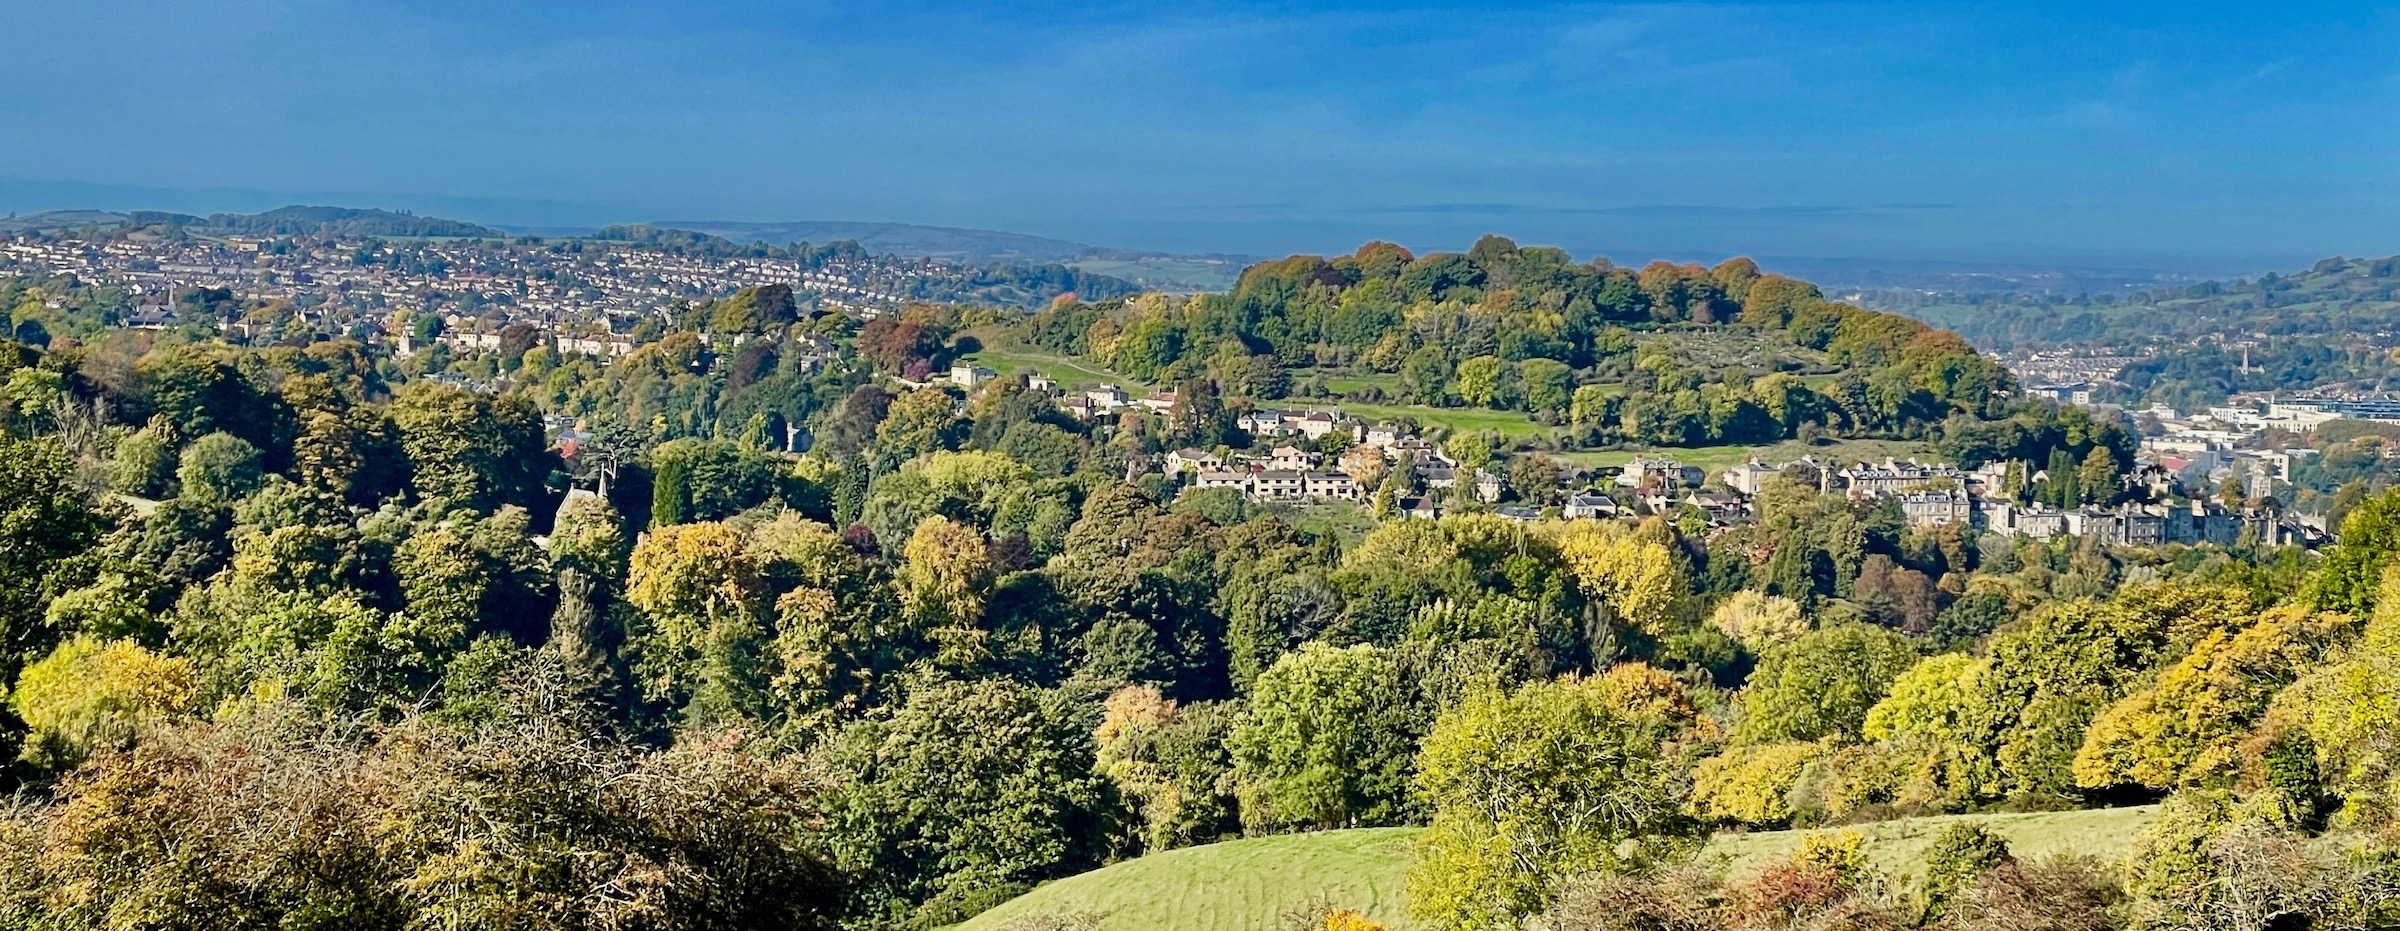 View from the Skyline Trail, Bath